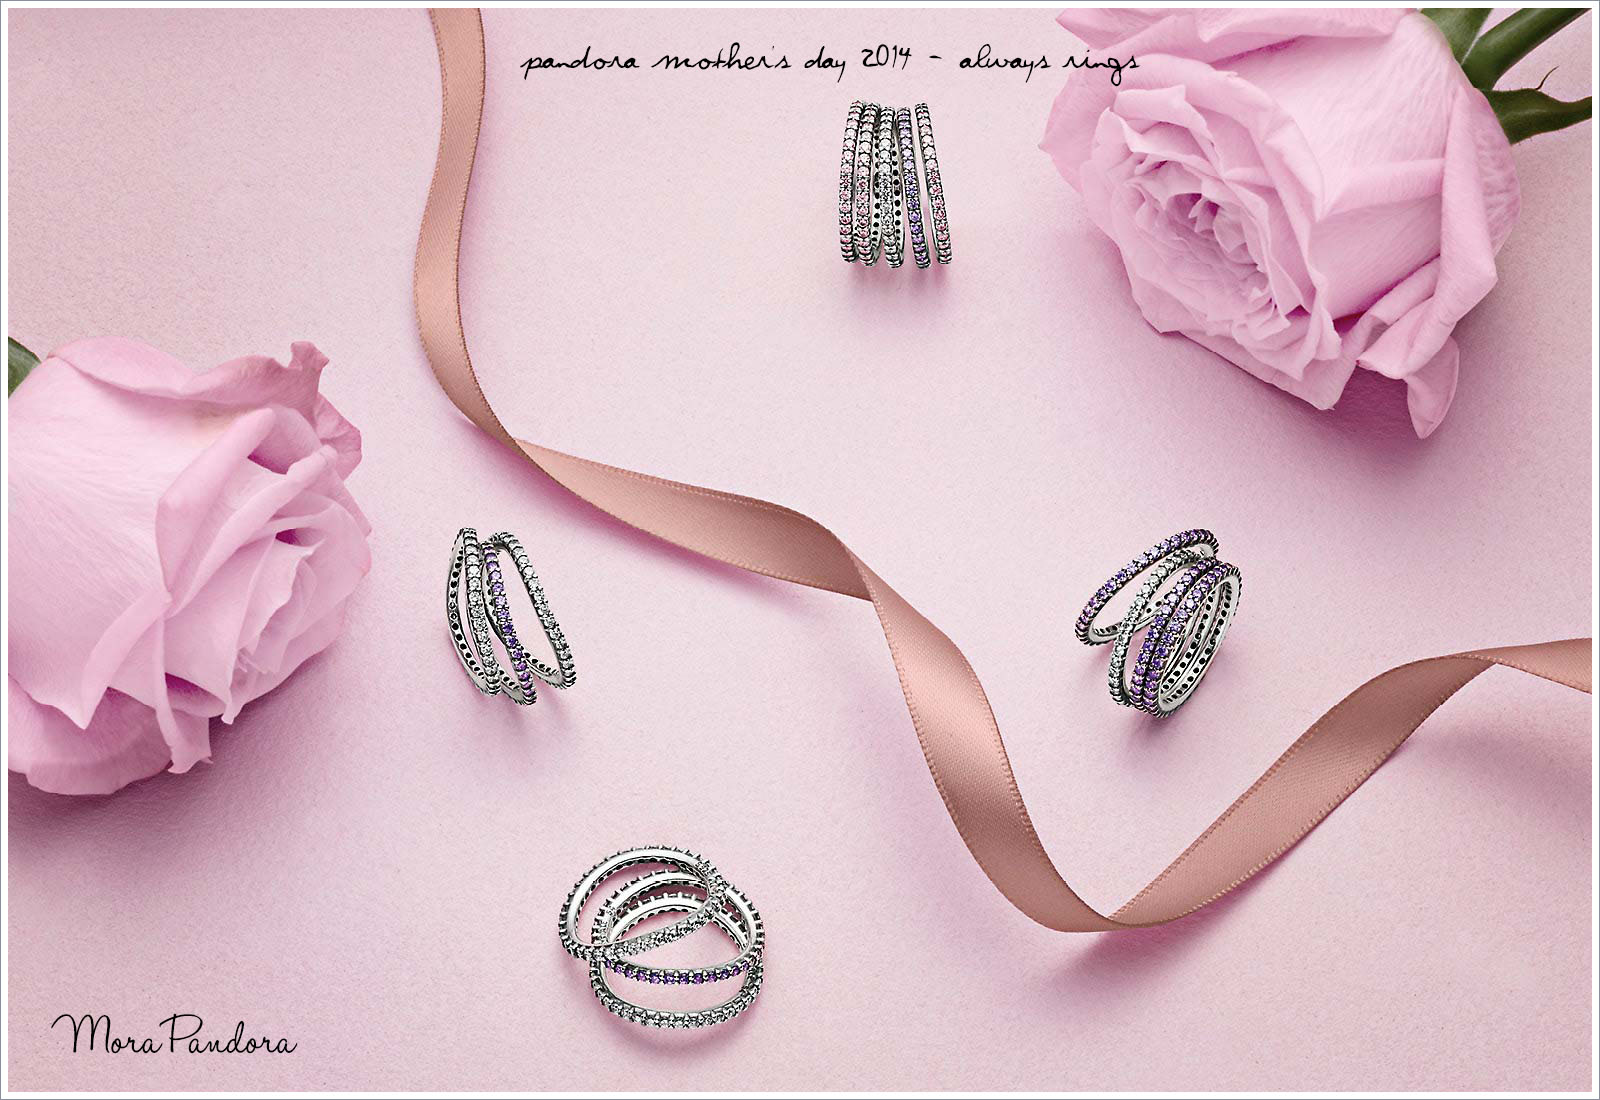 pandora mother's day campaign 2014 always